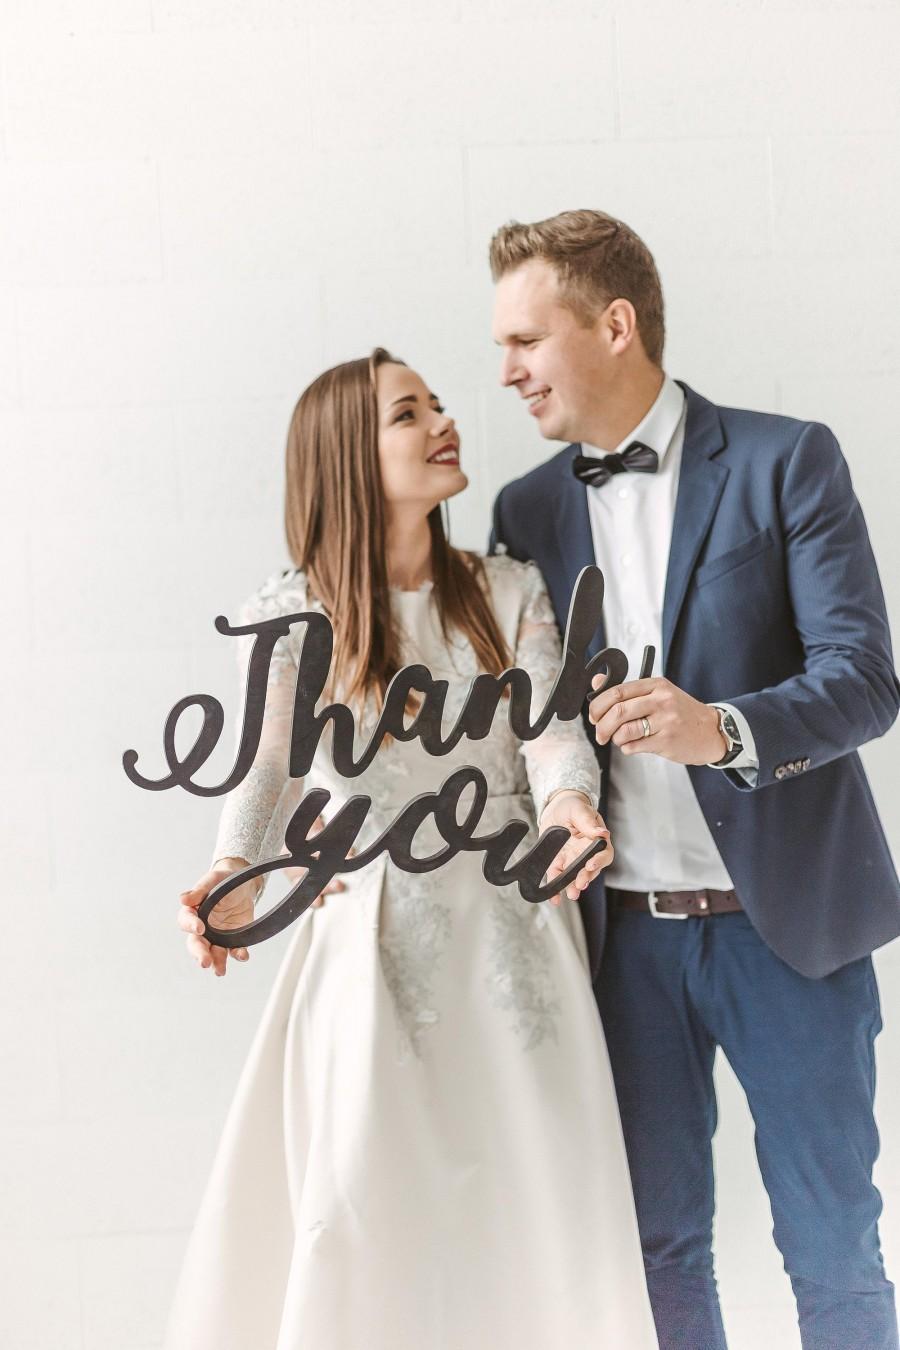 Mariage - Wedding thank you sign - wooden sign, wedding decor, wedding photo sign, wedding photo prop,rustic wood sign,wedding sign,Couple Photo Prop